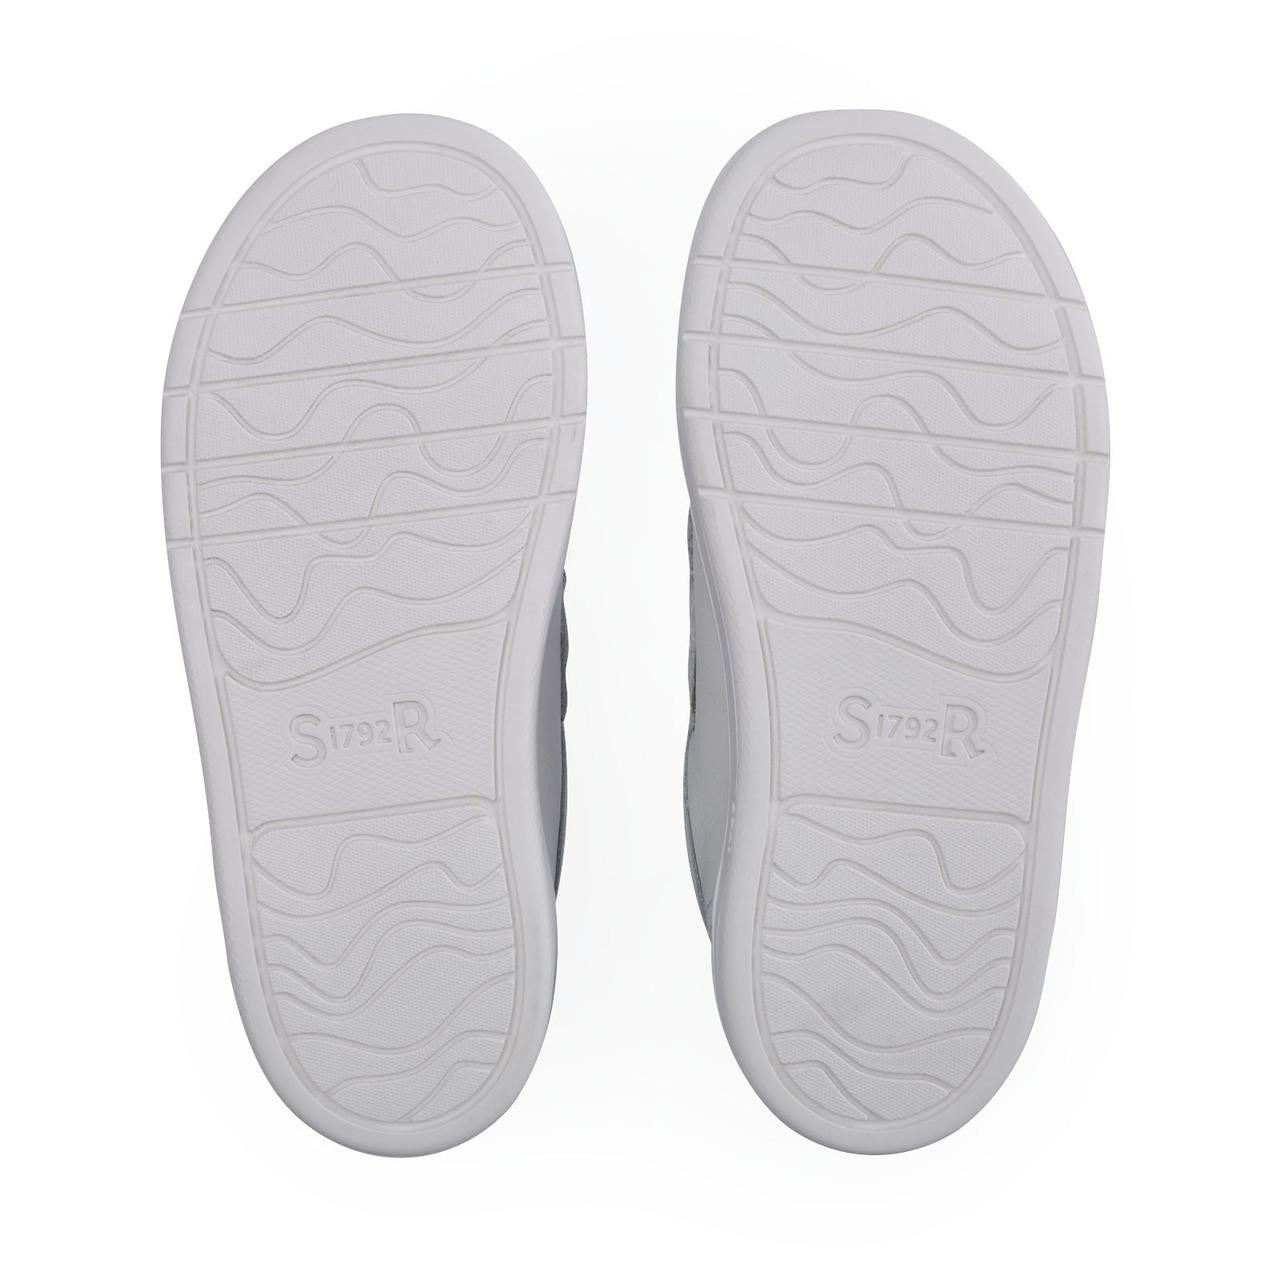 A pair of boys casual shoes by Start Rite, style Explore, in white and navy leather with double velcro fastening. Sole view.